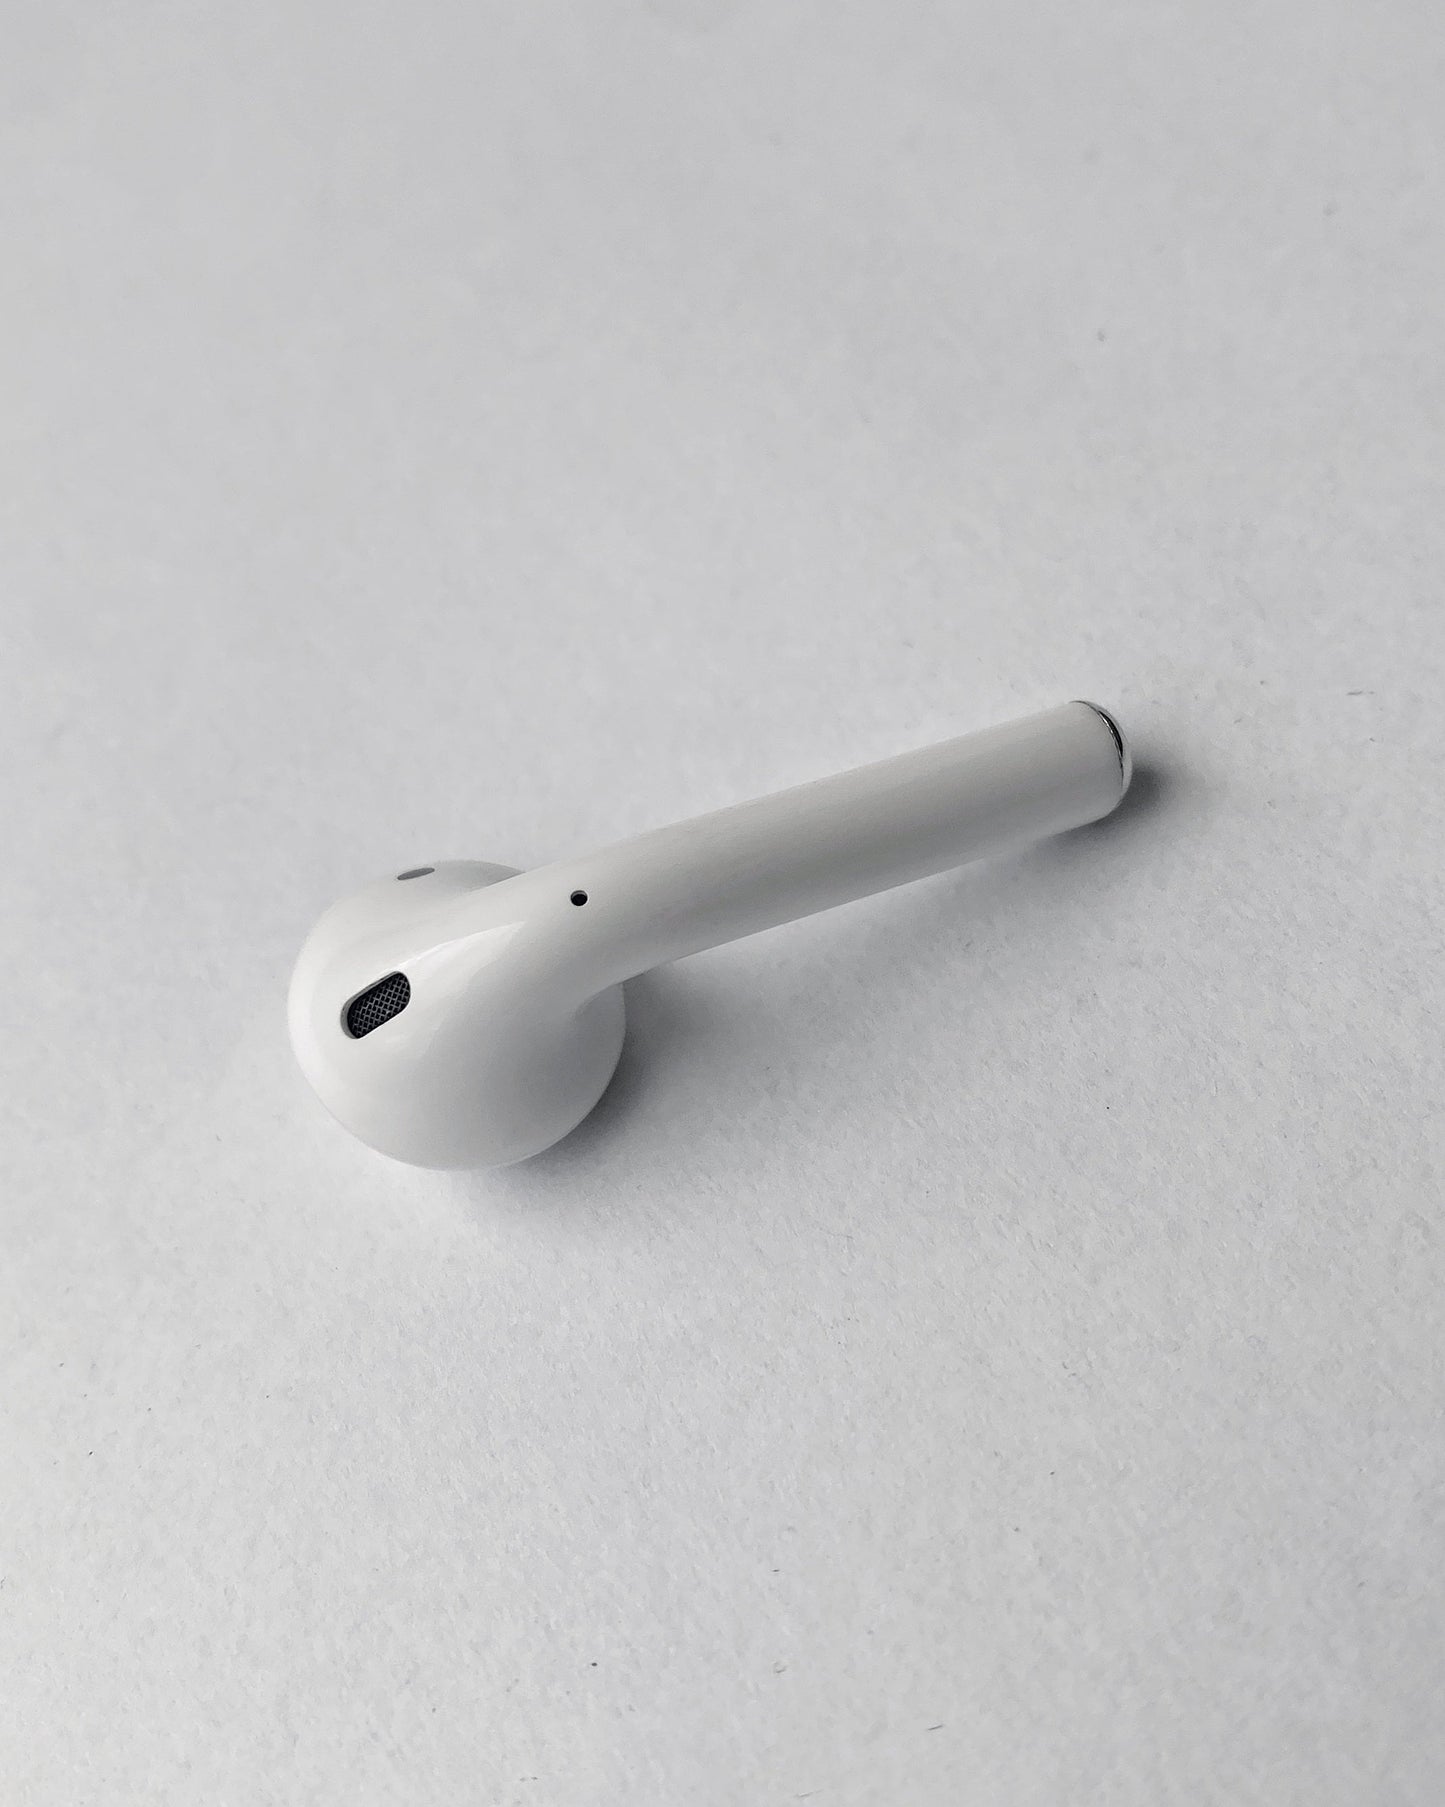 Apple AirPods 1. Generation links (A1722) refurbished